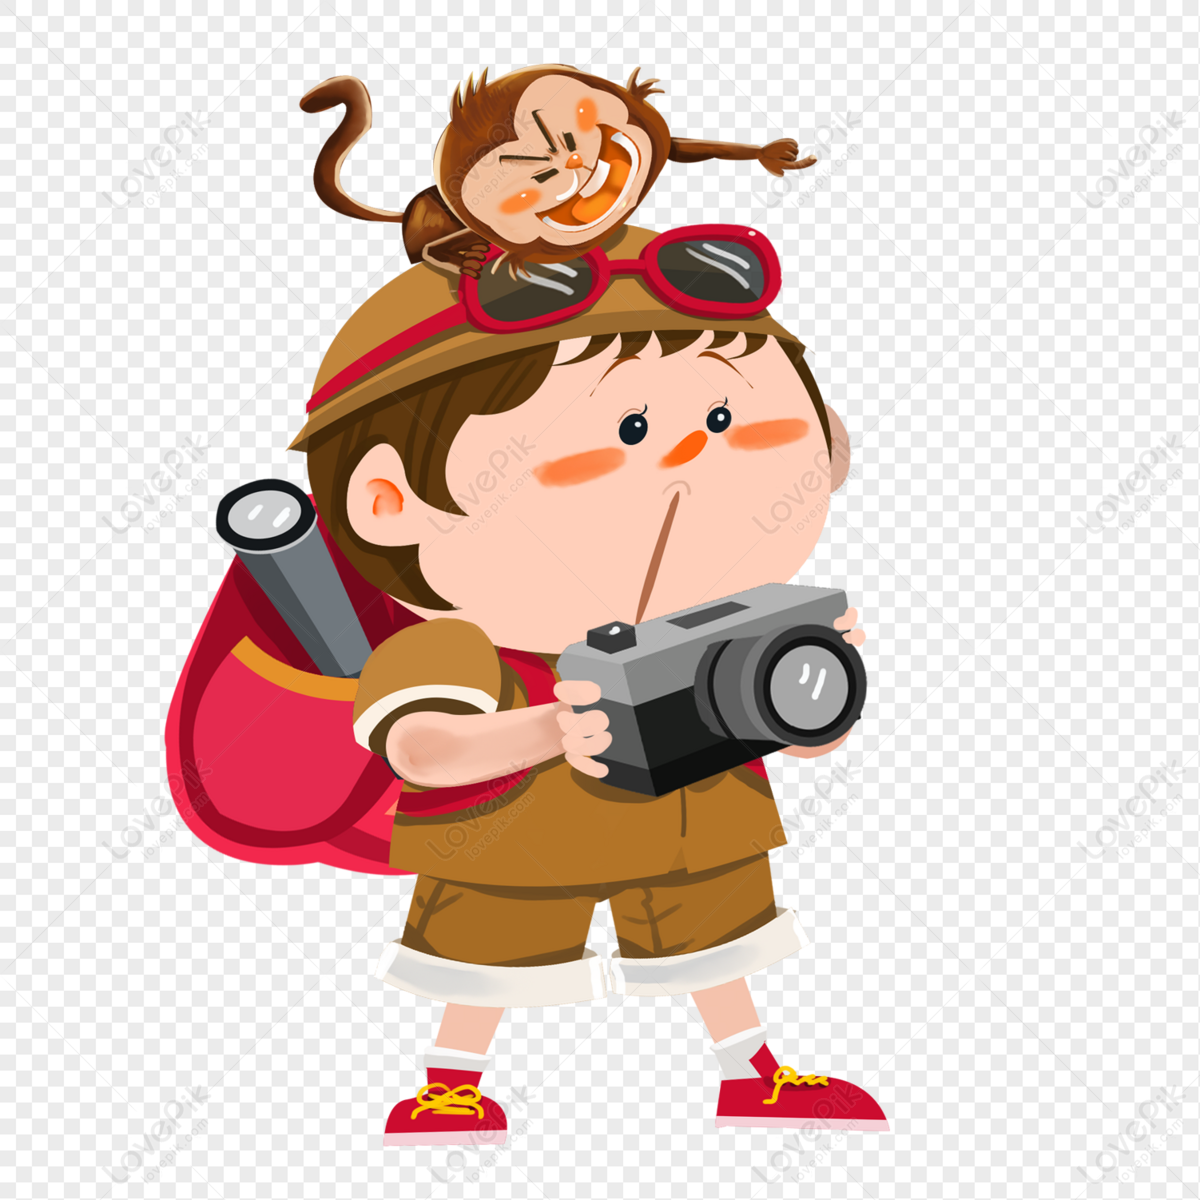 Cartoon Boy PNG Image Free Download And Clipart Image For Free Download -  Lovepik | 400445111